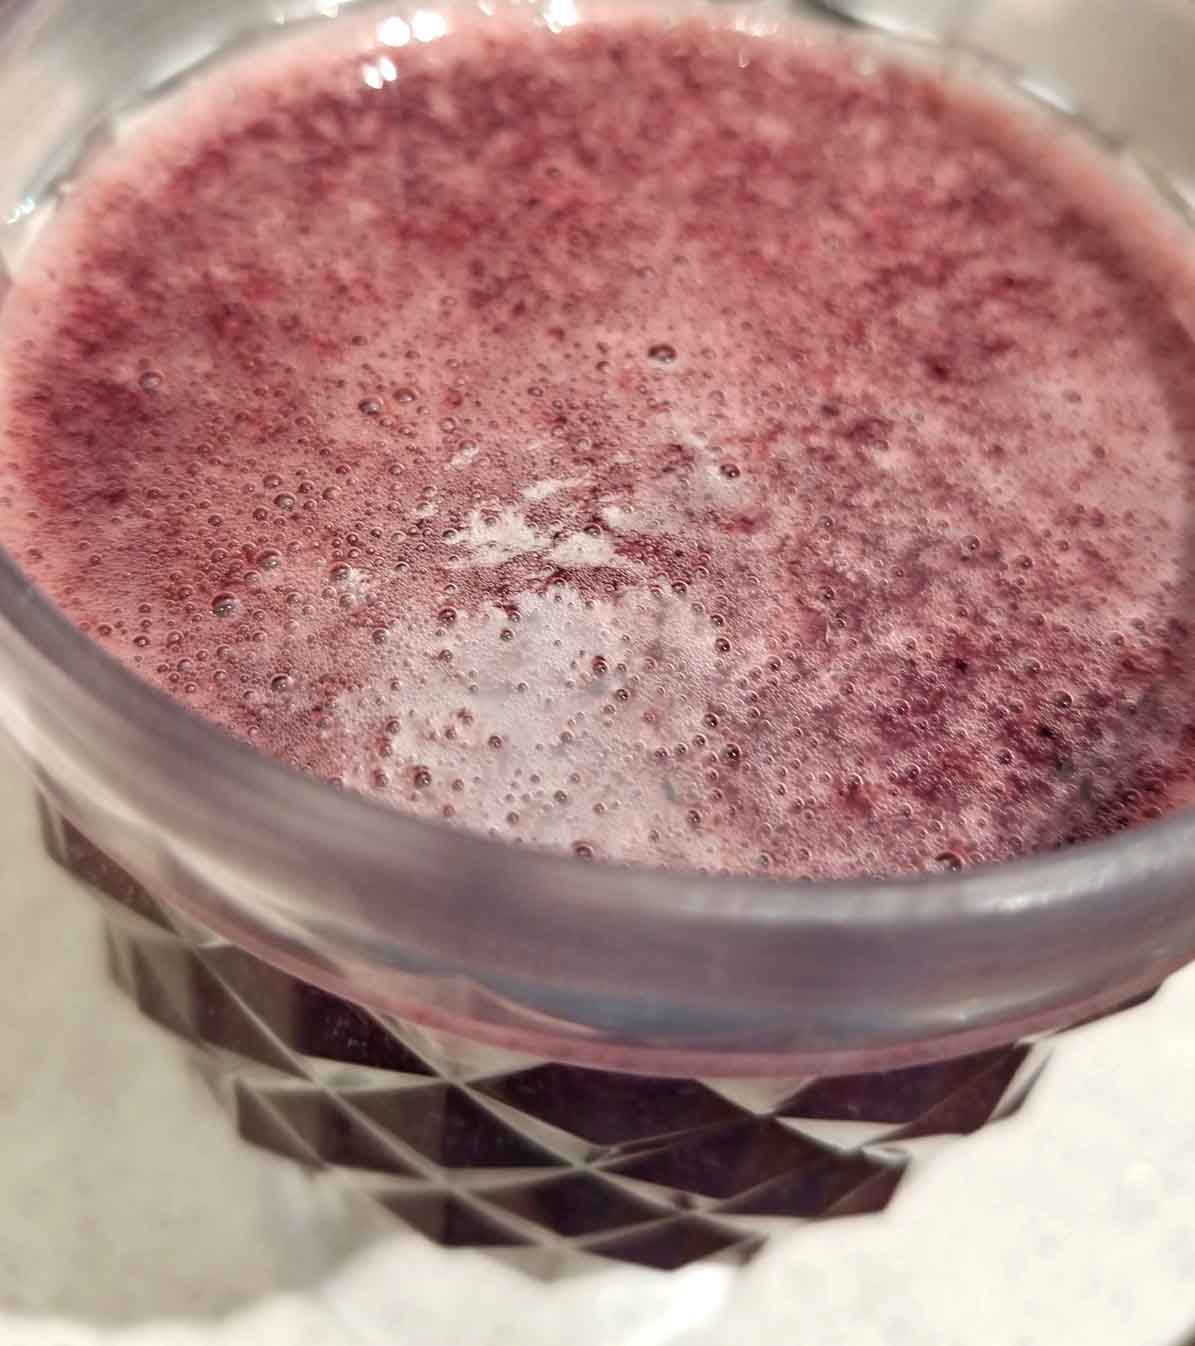 blueberry juice served in cup